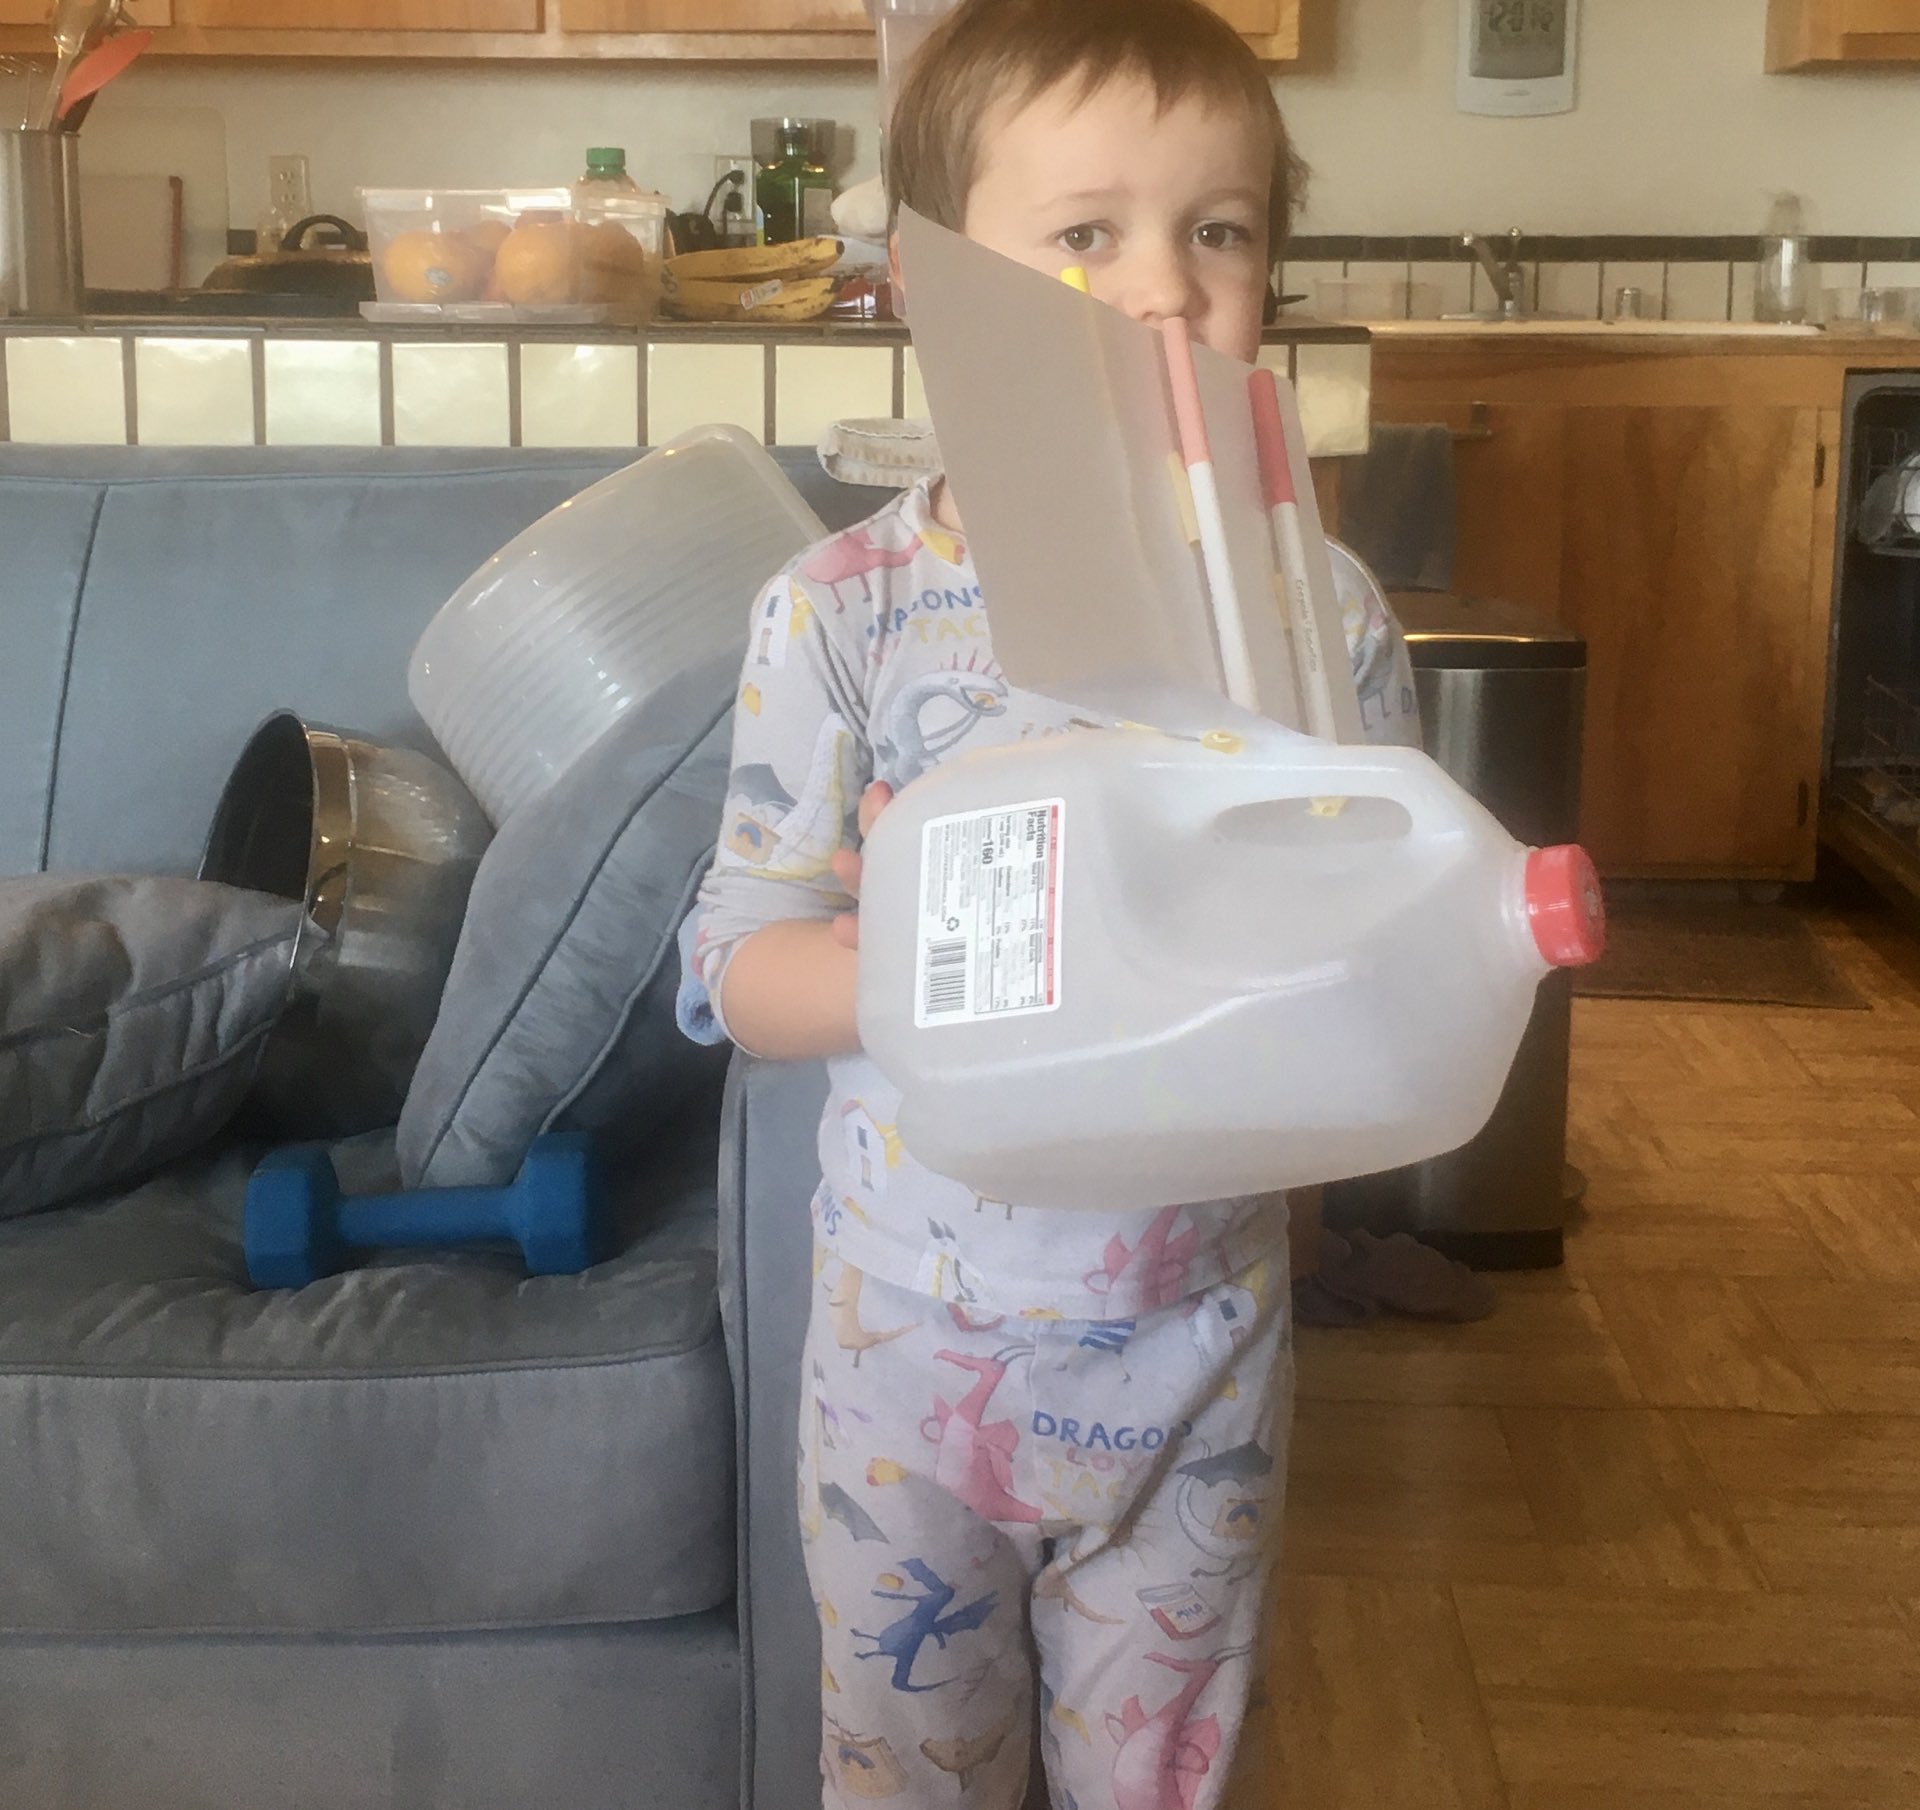 Julian holding a plastic milk jug which uses markers to prop up the sale made out of paper.